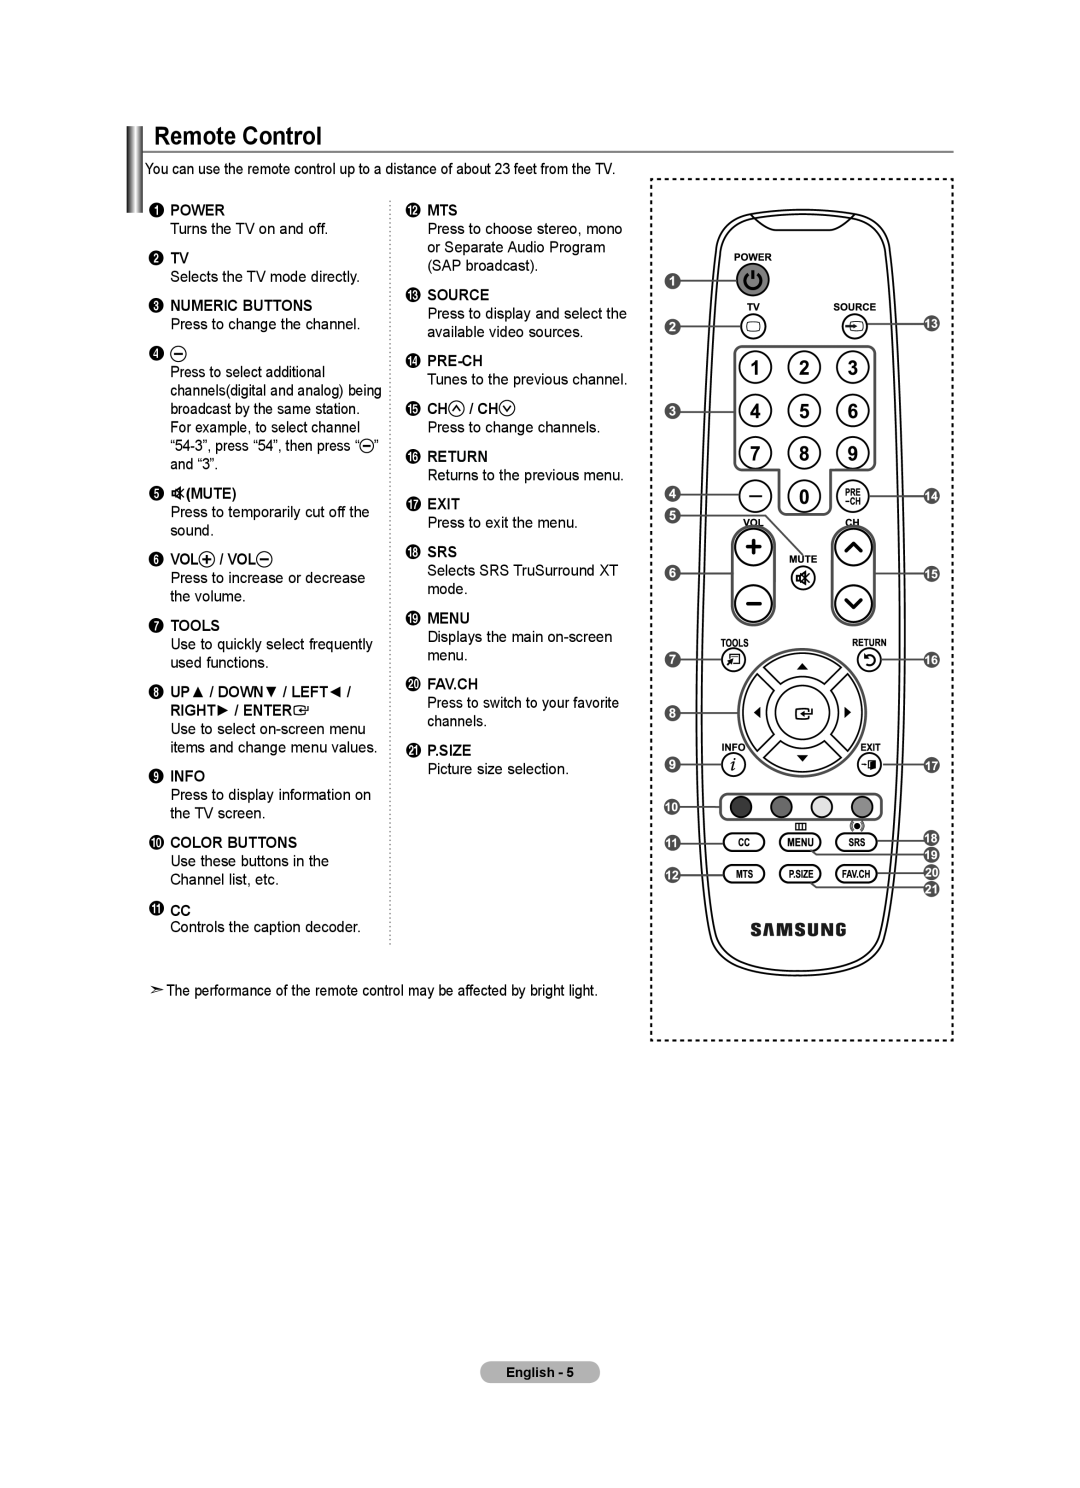 Samsung LN22A0J1D Remote Control, Power, 2 TV, Numeric Buttons, 5MUTE, Vol / Vol, Tools, 8 UP / DOWN / LEFT RIGHT / ENTER 